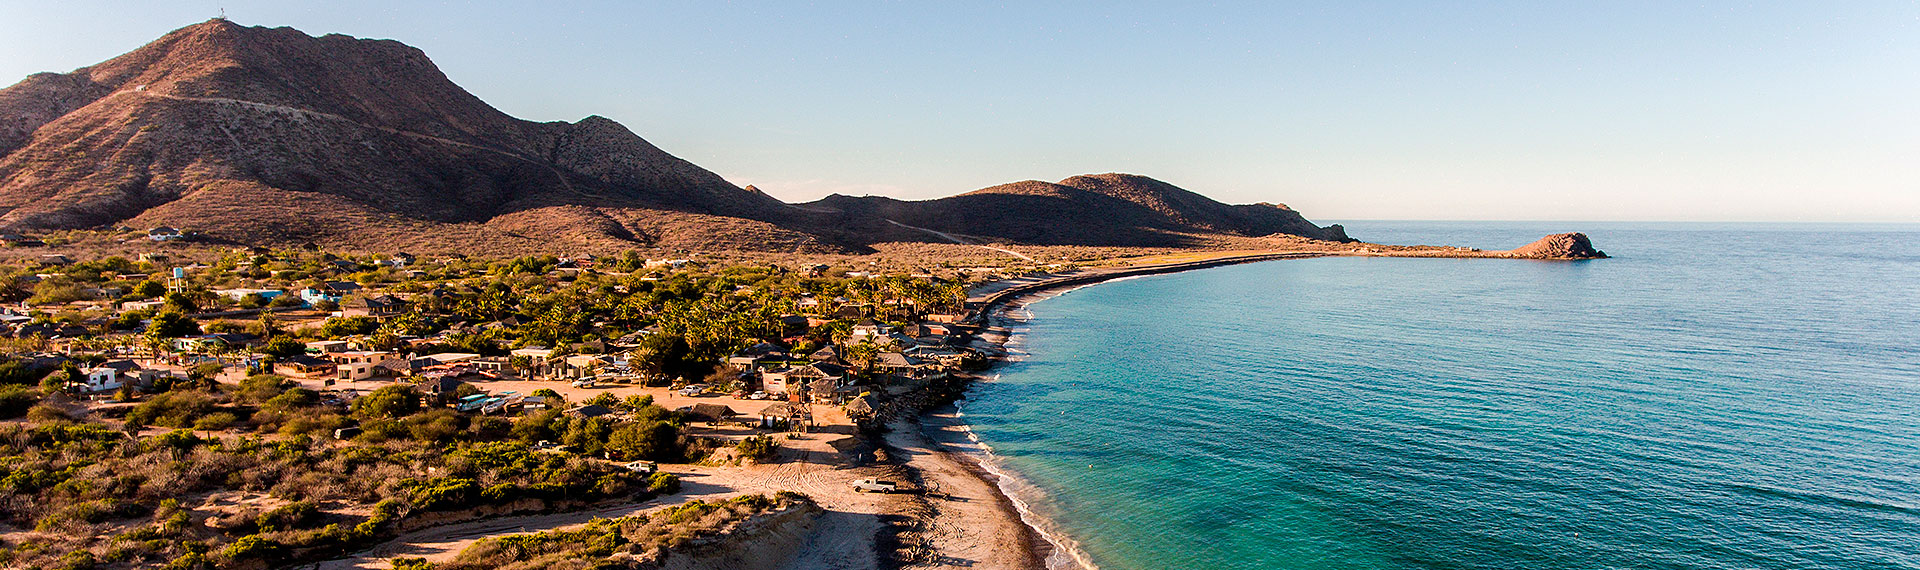 Things to do in cabo